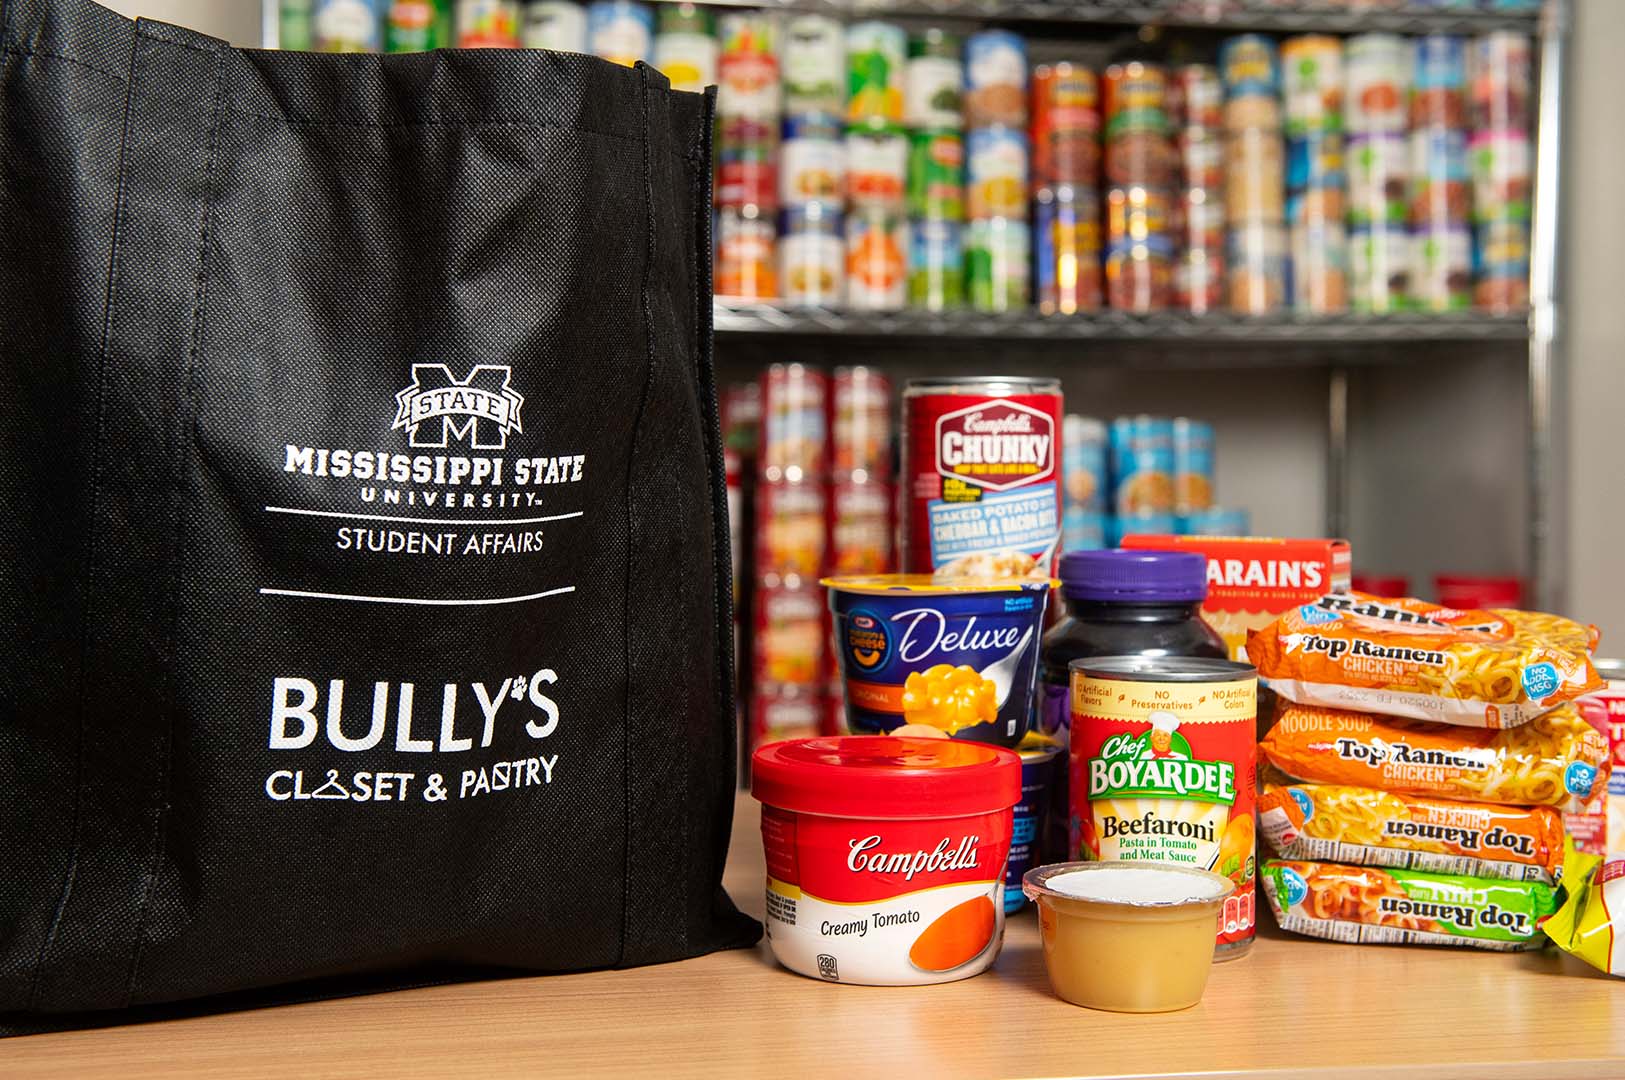 It is estimated that 36 percent of university students have limited or uncertain availability of food in the past 30 days. In January 2020, Mississippi State opened Bully’s Closet and Pantry to combat hunger on campus. Tax-deductible monetary donations to the MSU Food Security Network Fund can be made through the MSU Foundation at <a href="https://www.accelerate.msstate.edu" alt="Accelerate" target="_blank">www.accelerate.msstate.edu</a>. (Photo by Beth Wynn)